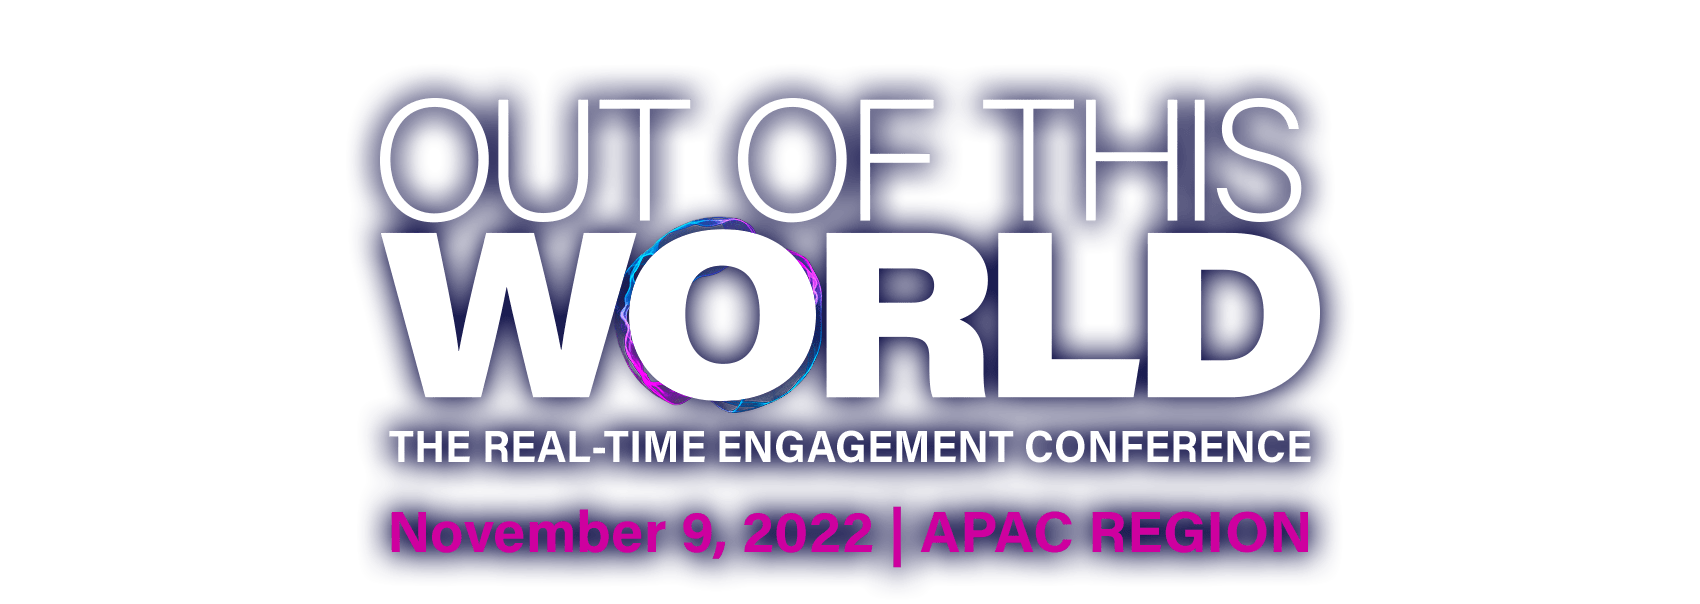 Out of this world, real-time engagement conference